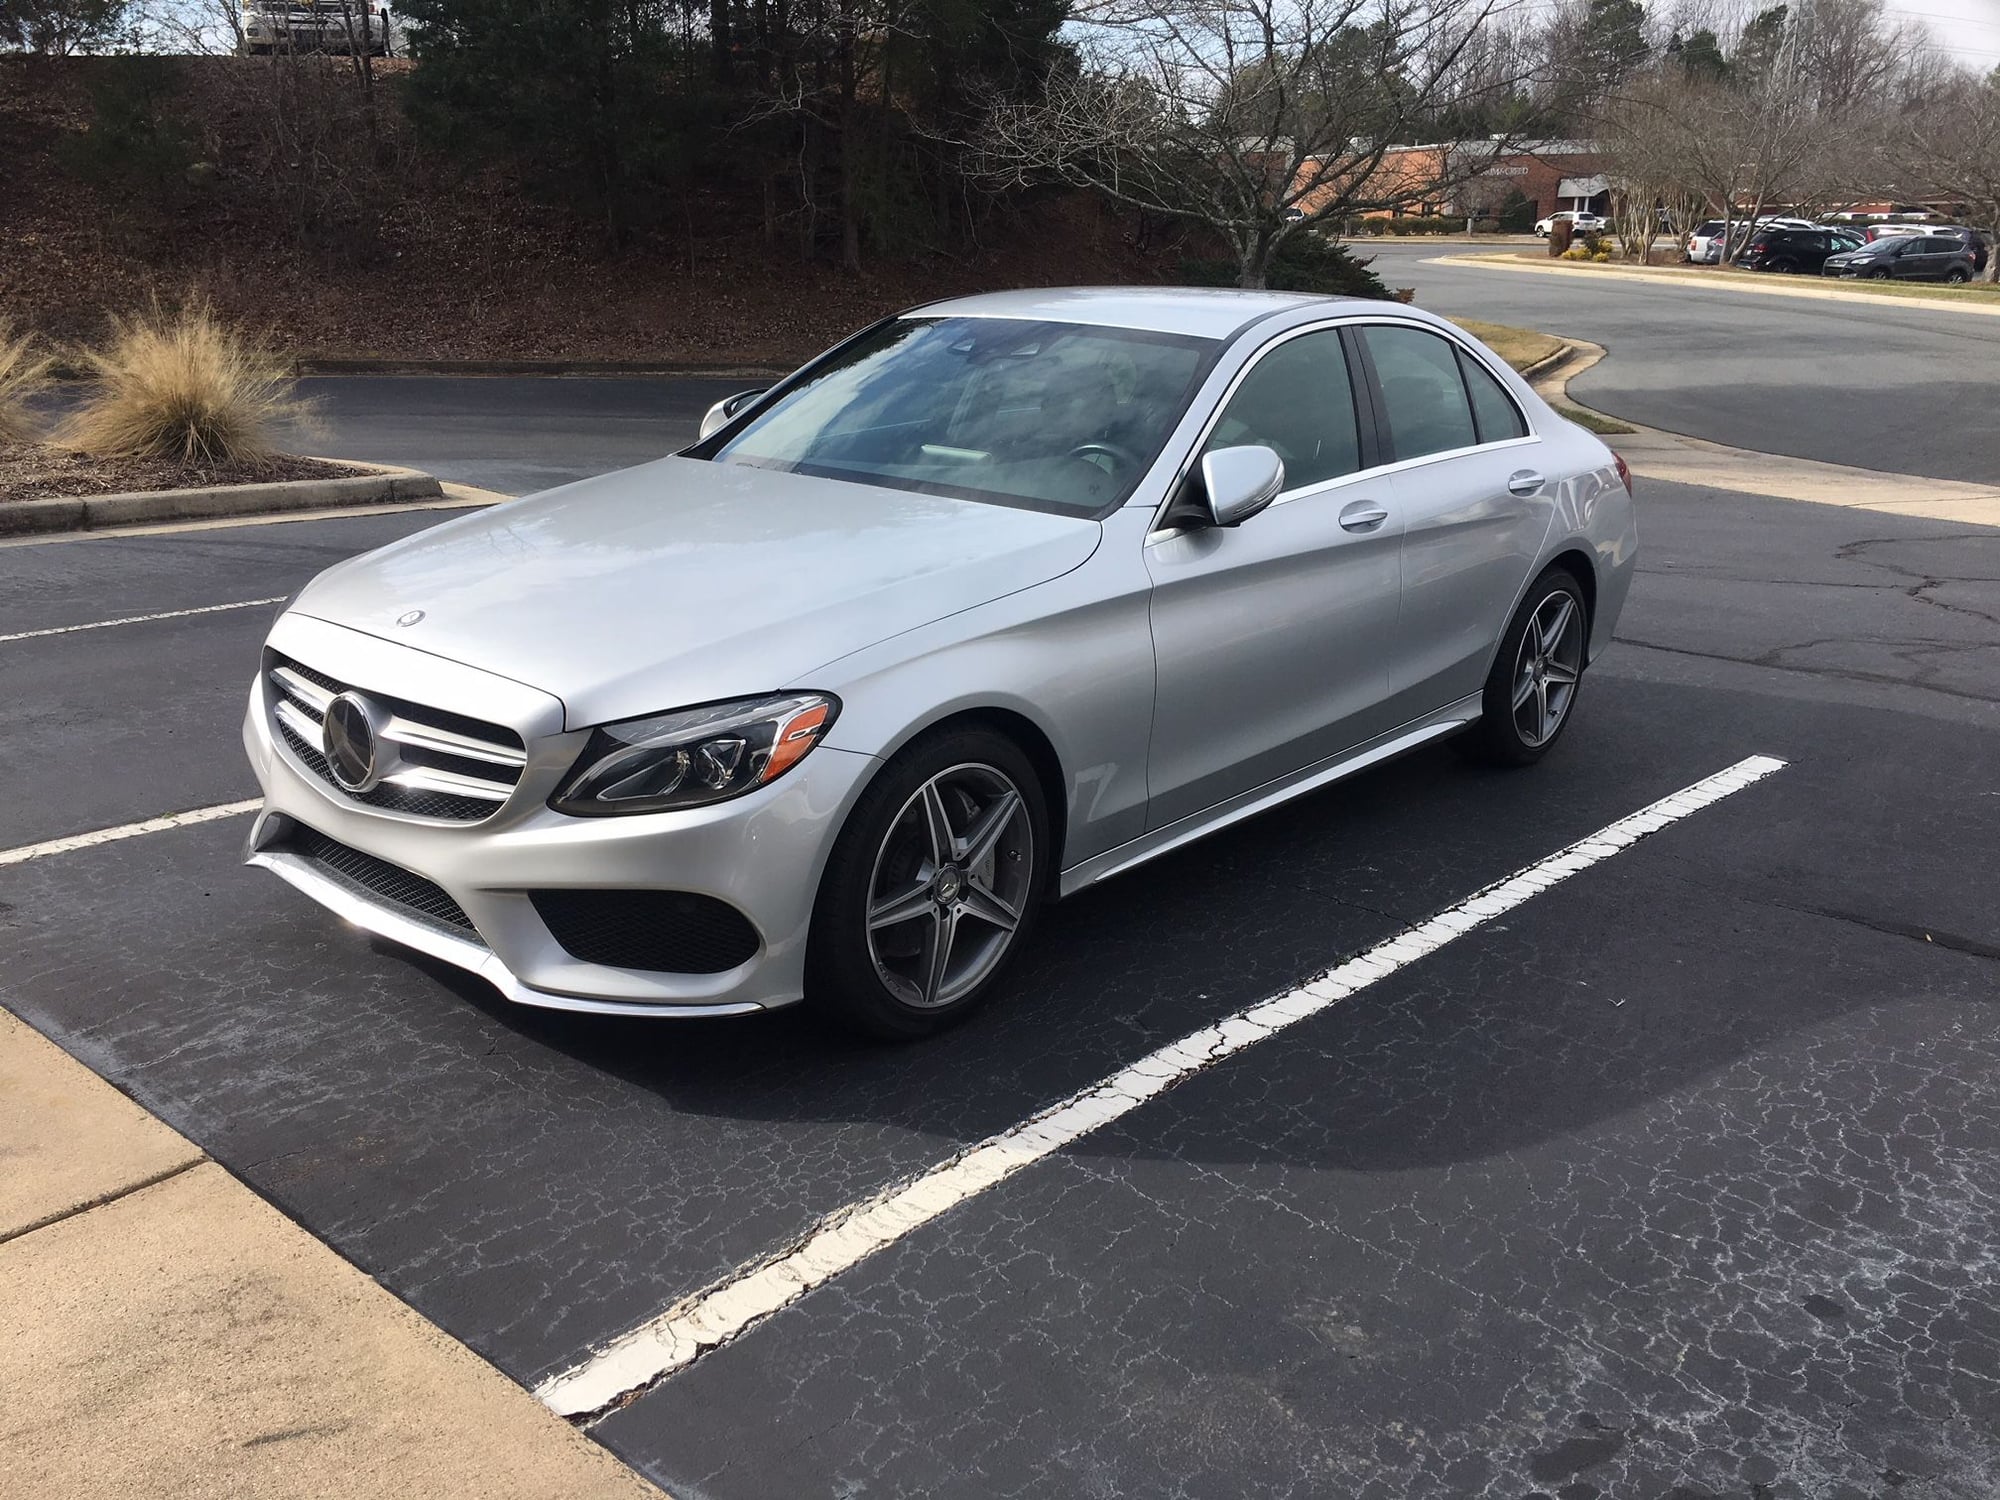 Wheels and Tires/Axles - 2015 AMG 18" Wheels and Tires - Used - 2015 to 2018 Mercedes-Benz C300 - Charlotte, NC 28227, United States